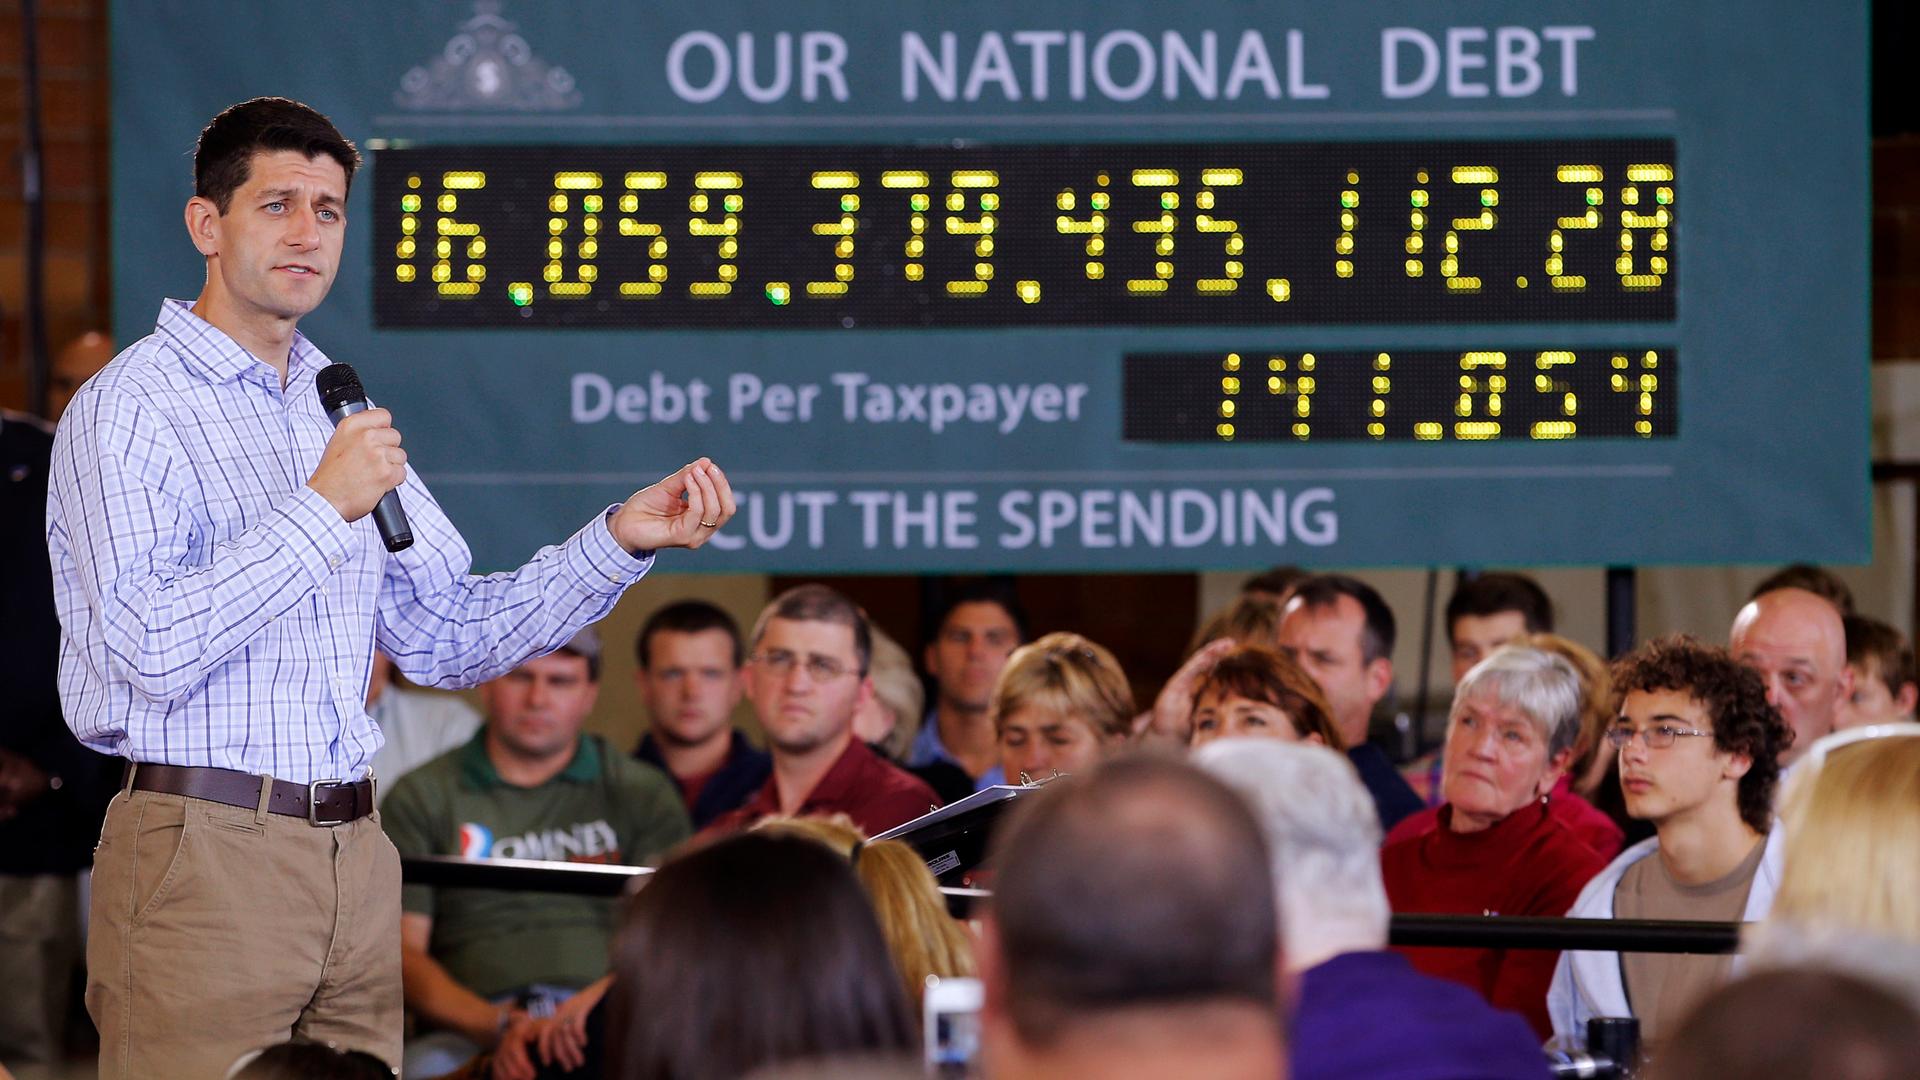 Republican vice-presidential candidate U.S. Congressman Paul Ryan speaking in front of the campaign's "national debt clock" in Dover, New Hampshire September 18, 2012. 